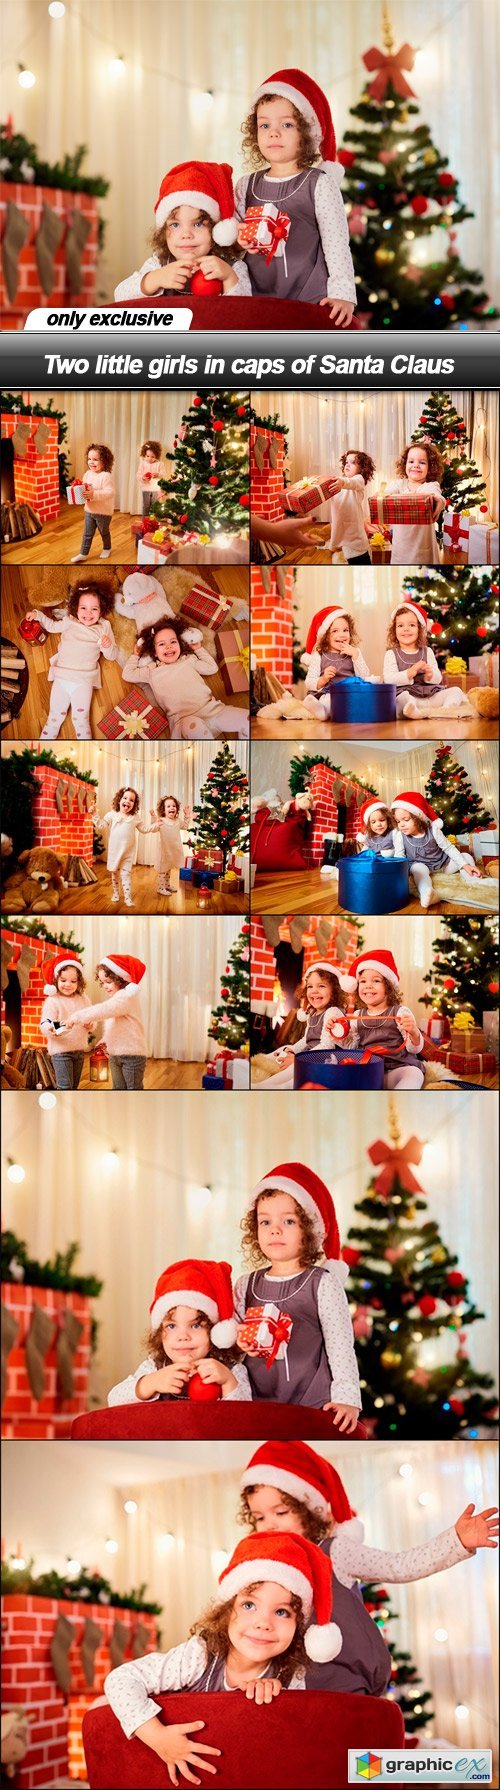 Two little girls in caps of Santa Claus - 10 UHQ JPEG